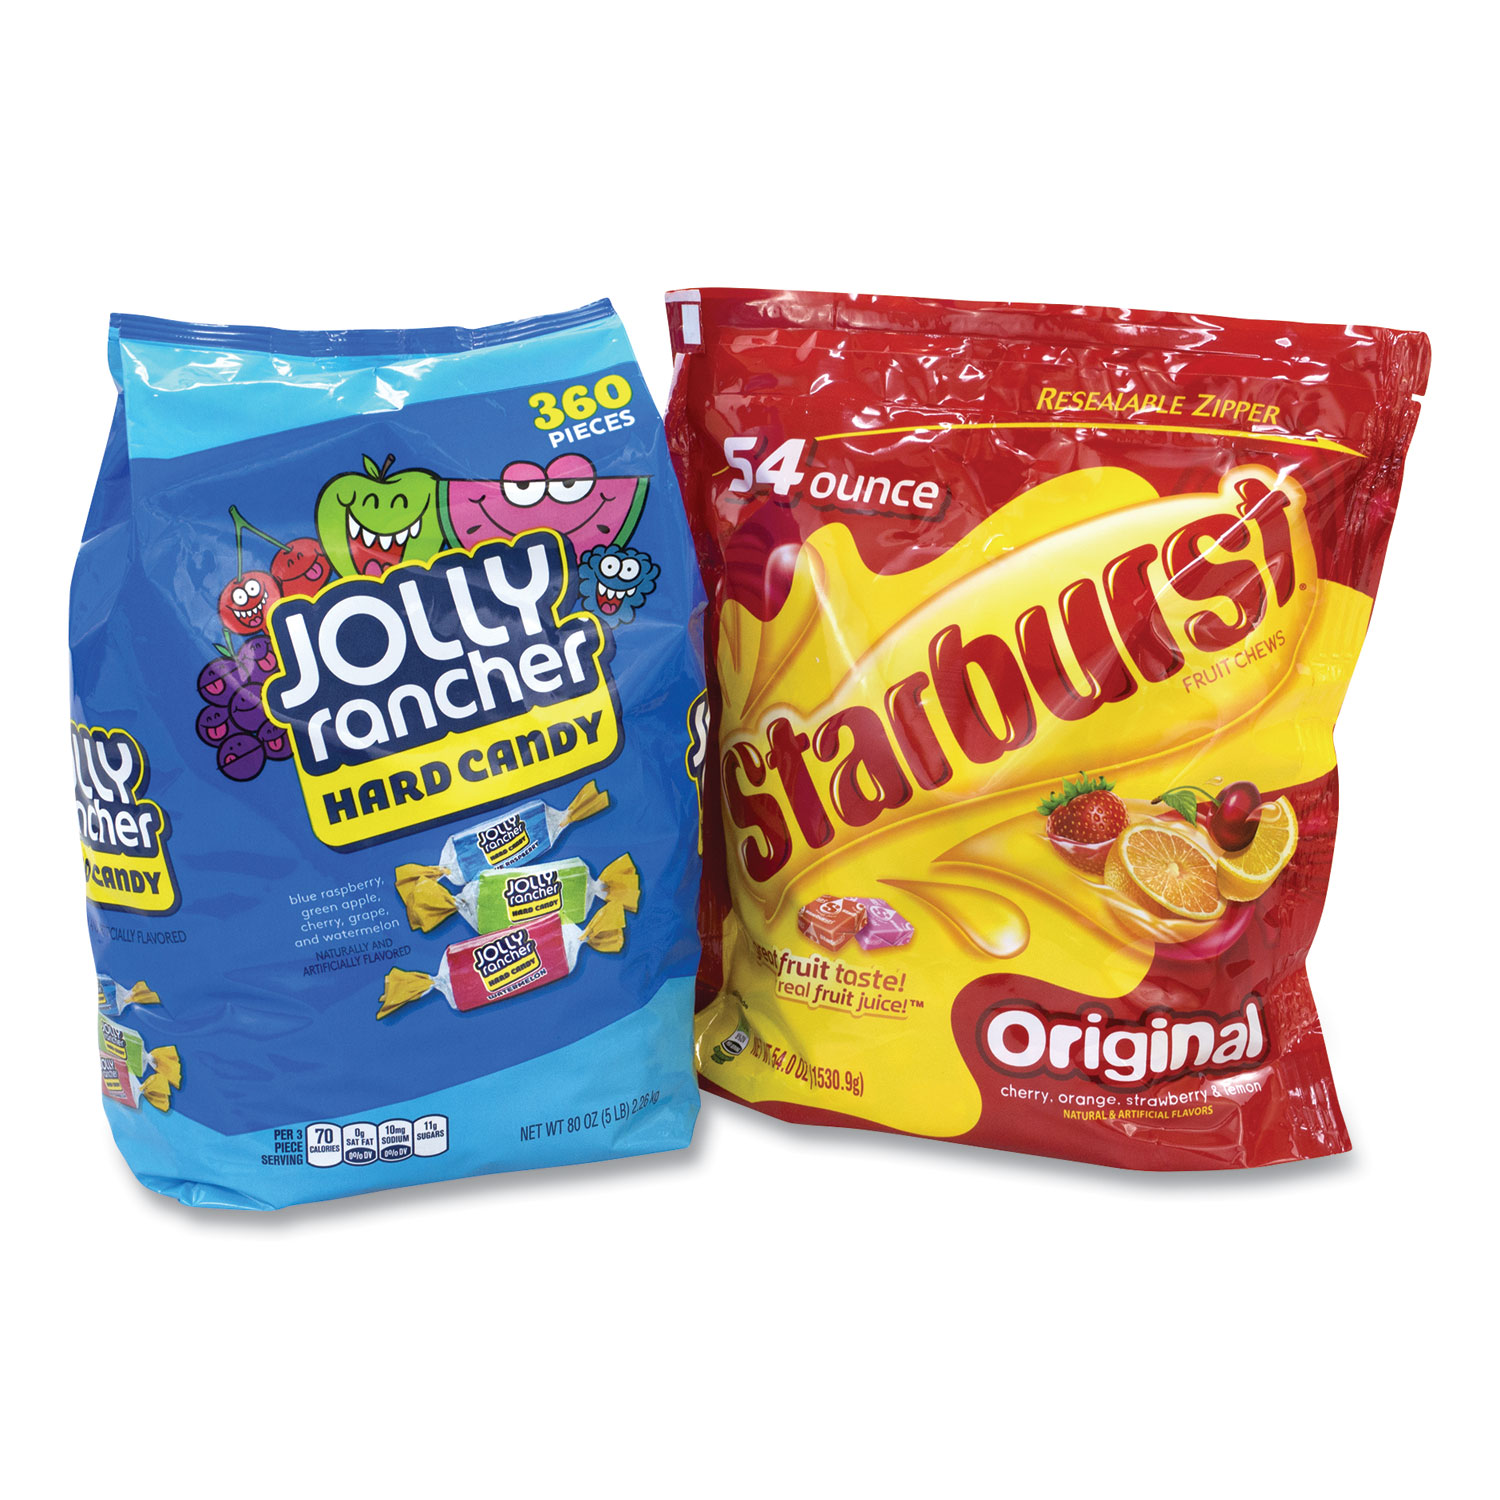 National Brand Chewy and Hard Candy Party Asst, Jolly Rancher/Starburst, 8.5 lbs Total, 2 Bag Bundle, Free Delivery in 1-4 Business Days